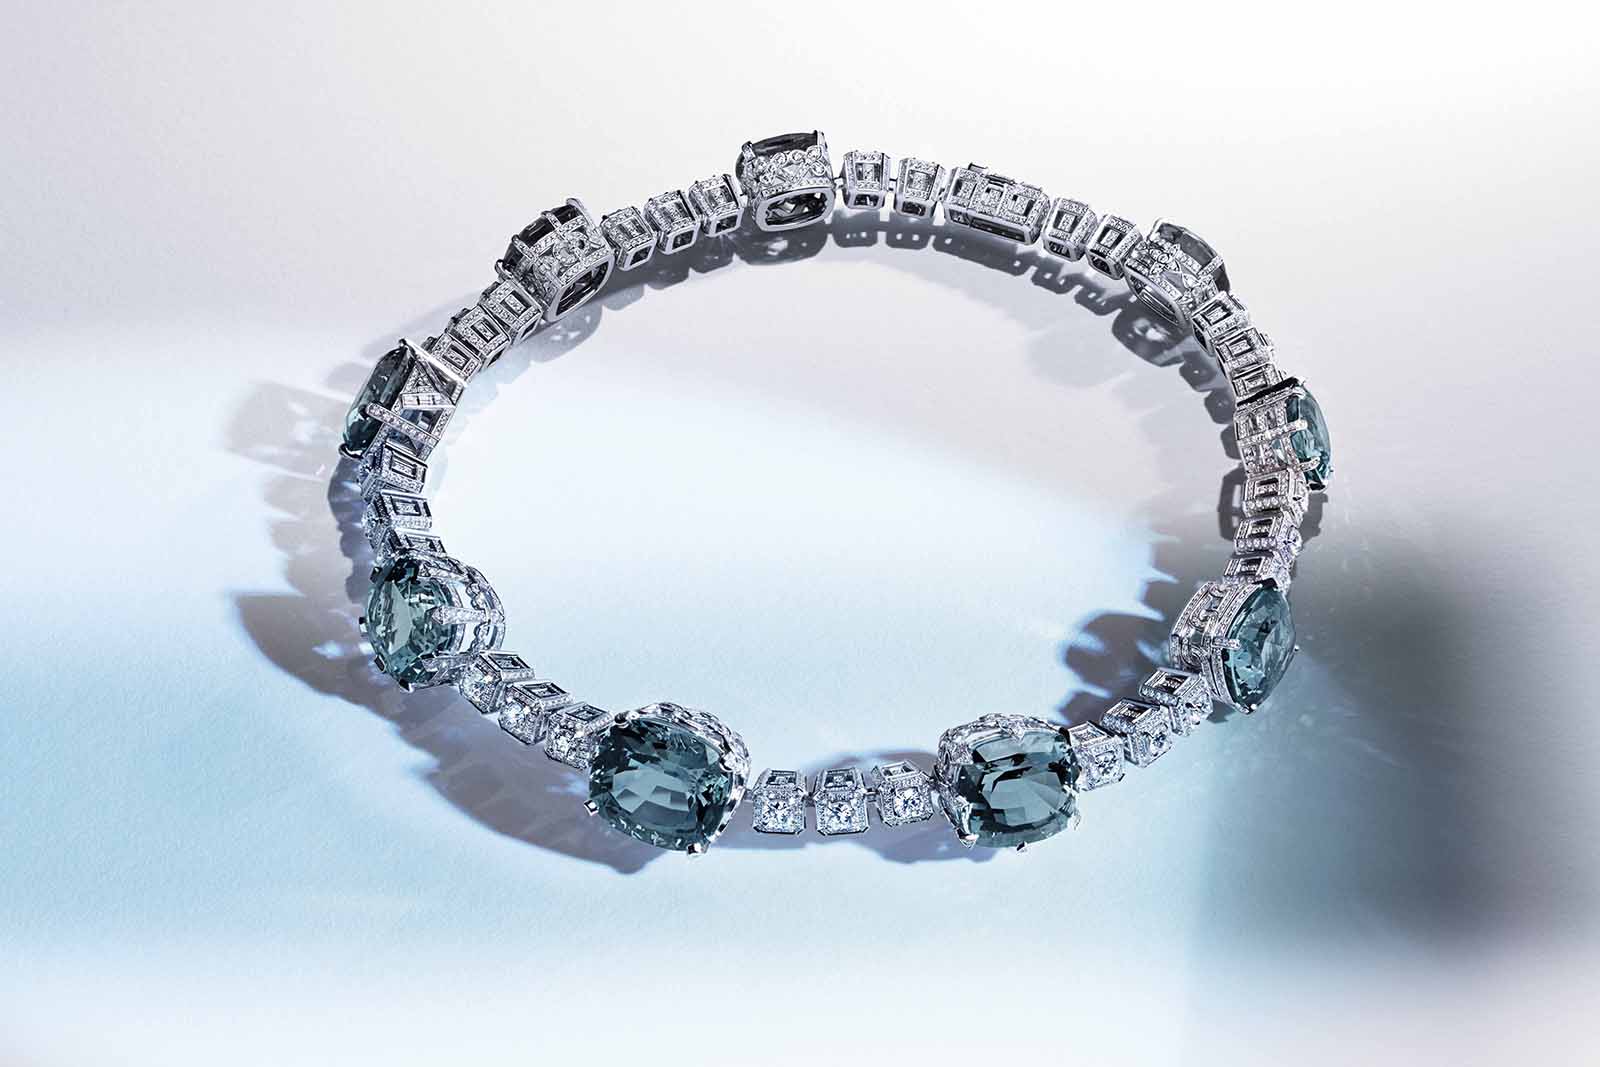 Louis Vuitton ‘Riders of the Knights’ collection 'La Reine' necklace with 152.83ct aqaumarine and diamonds in white gold